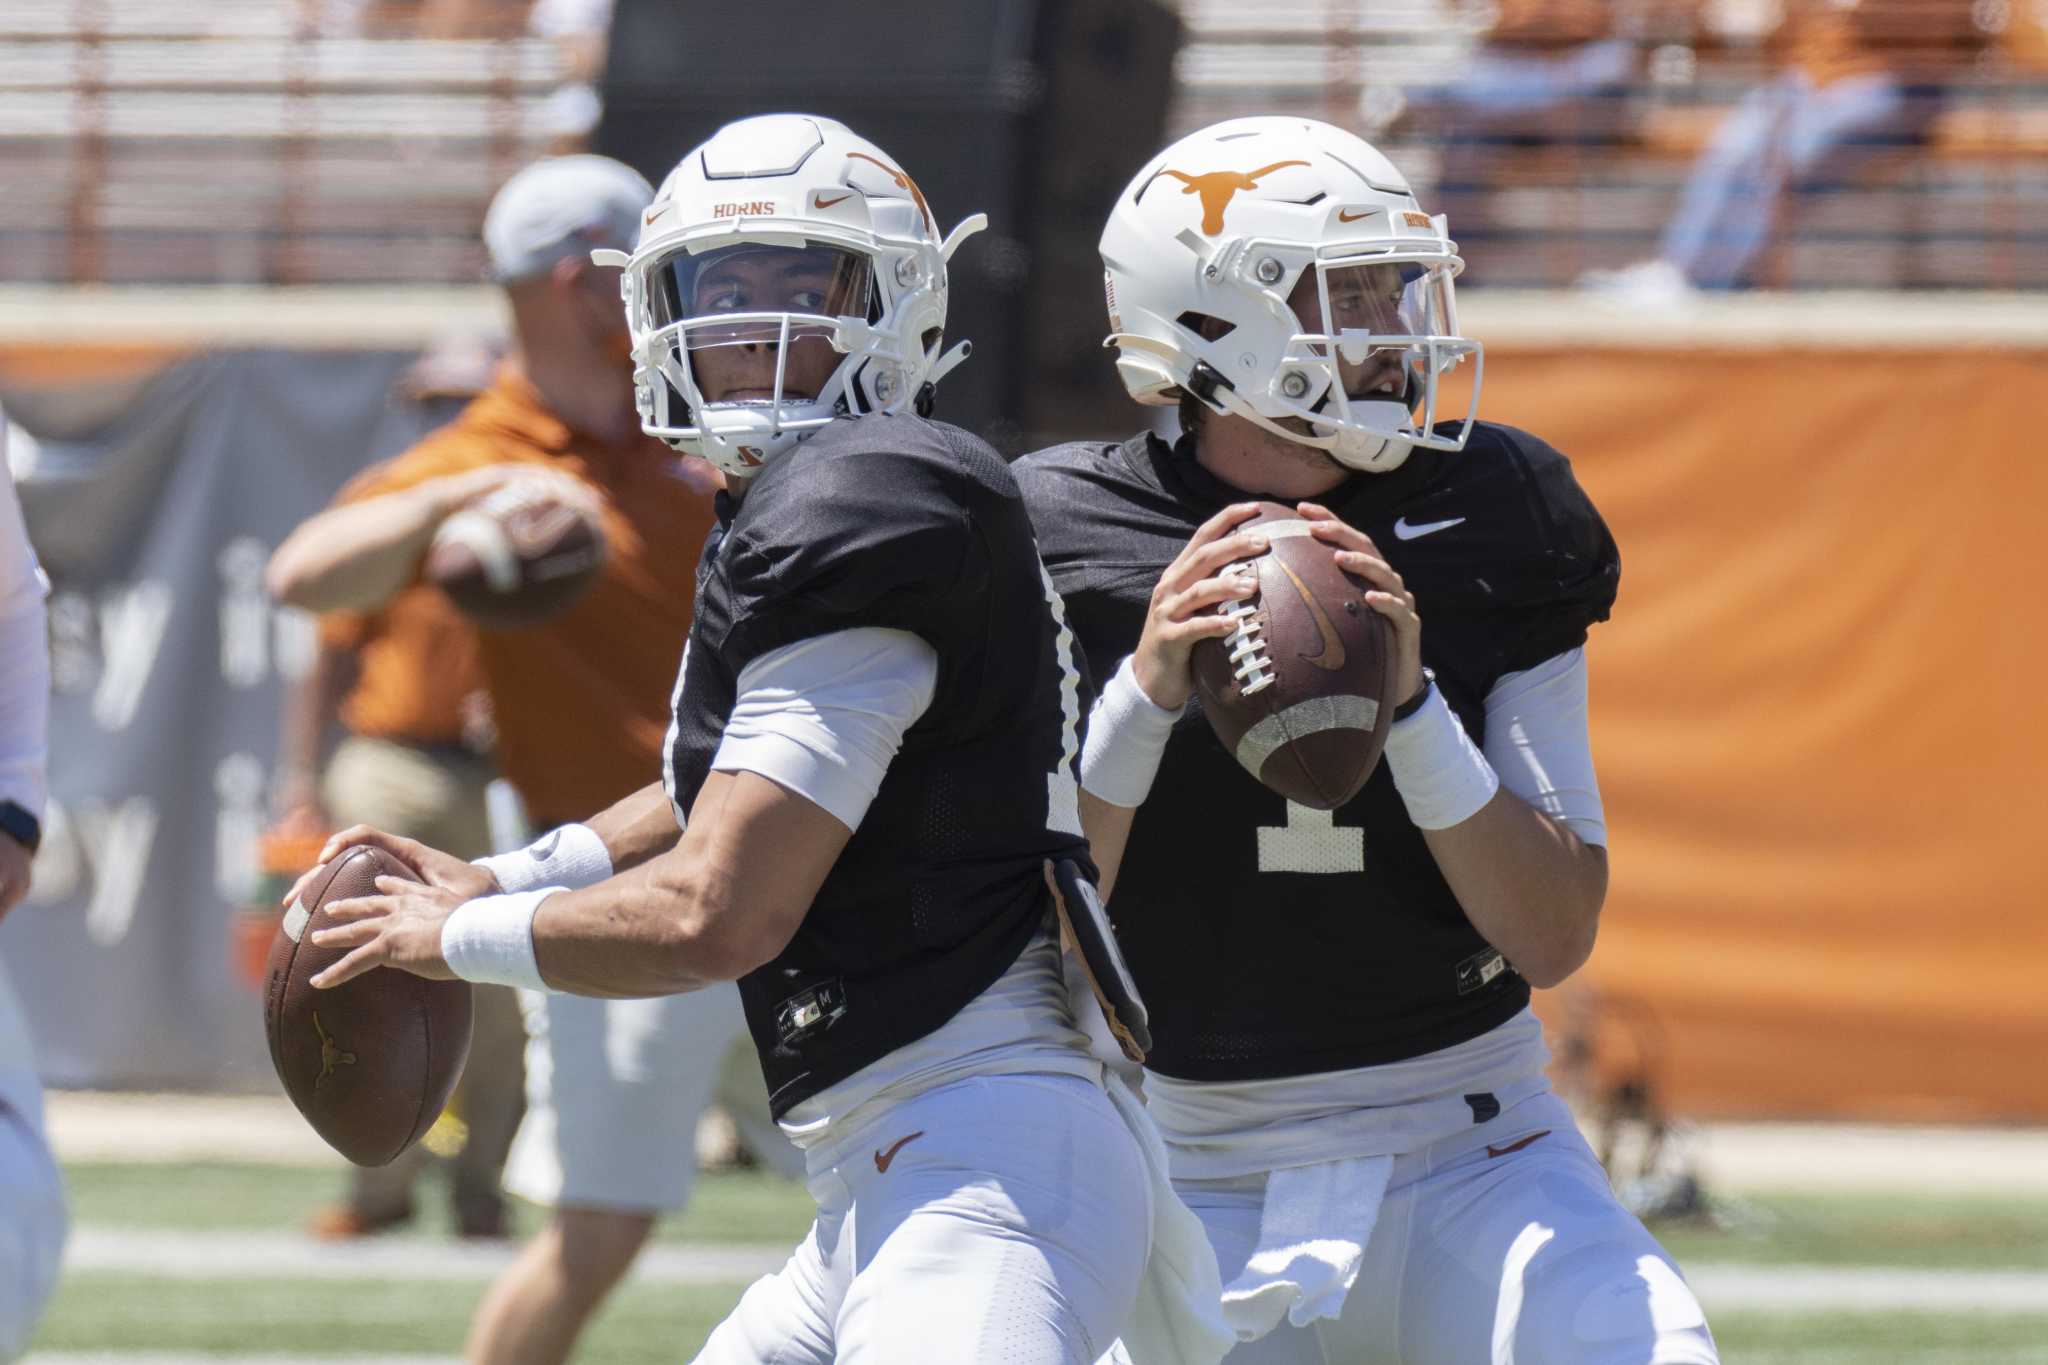 Takeaways from Texas spring football game